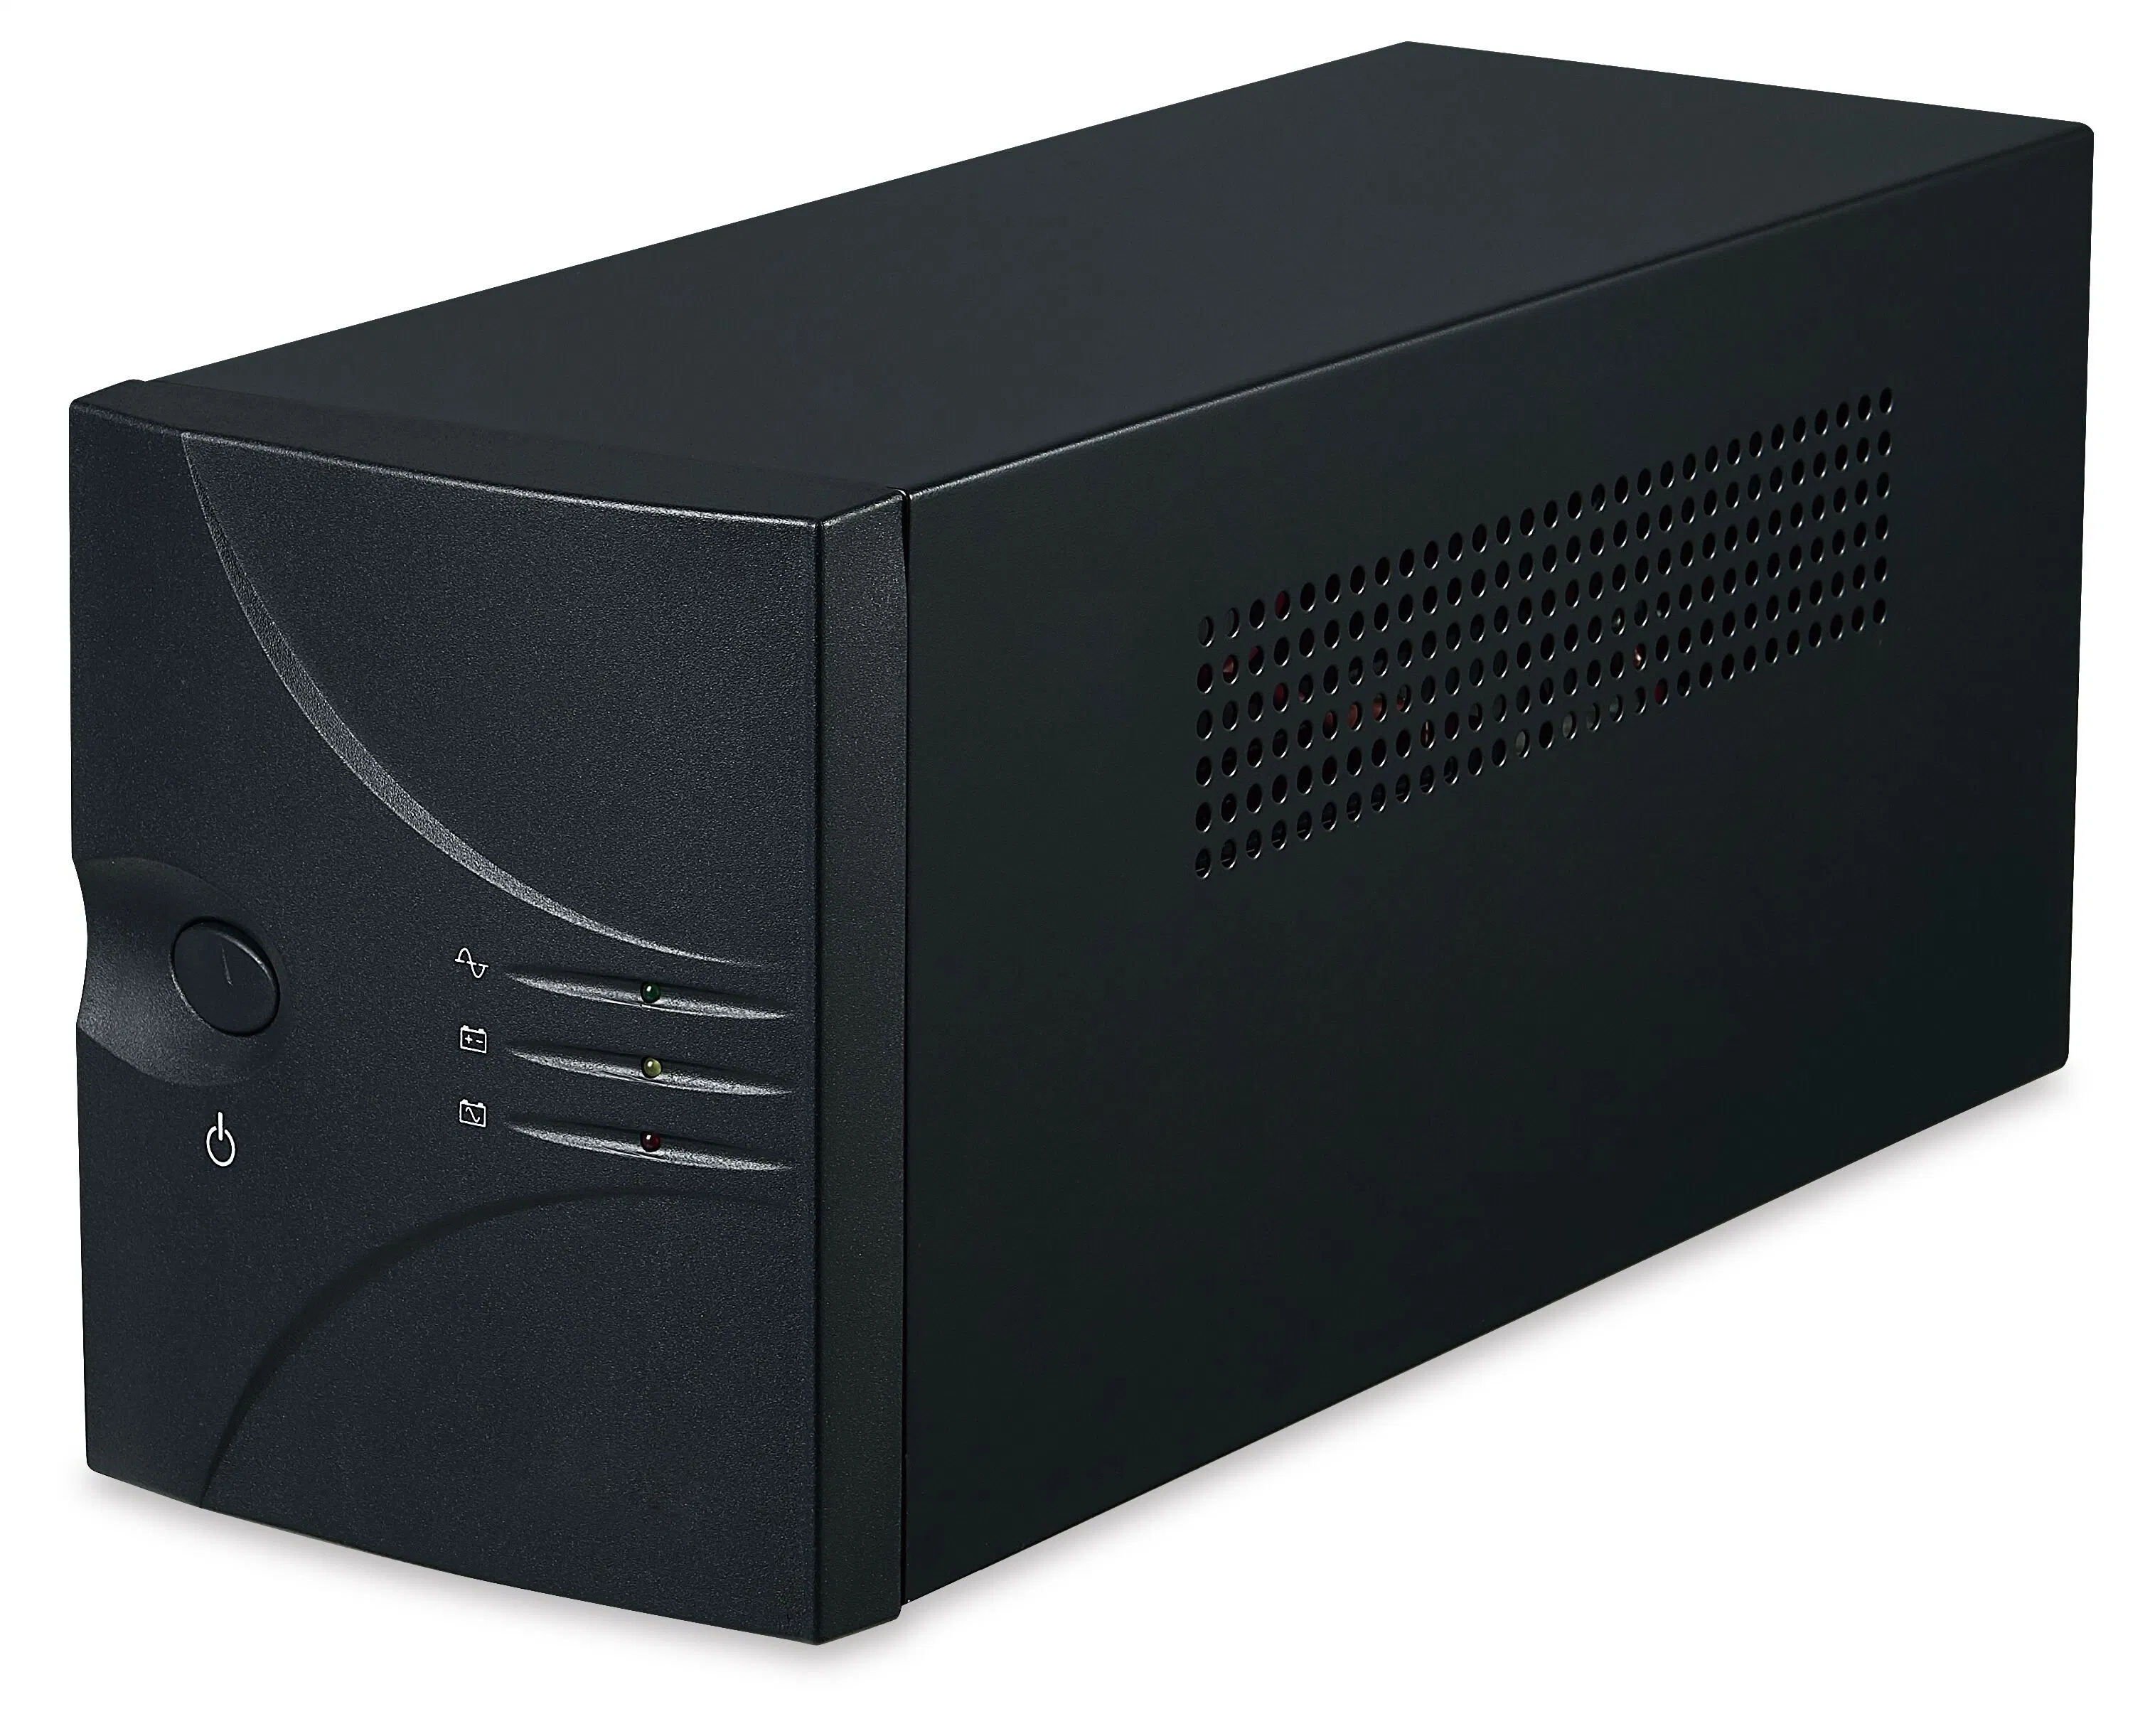 Ttn Uninterruptible Power Supply High Frequency UPS Double Conversion Online UPS Power 1kVA - 20kVA with Battery